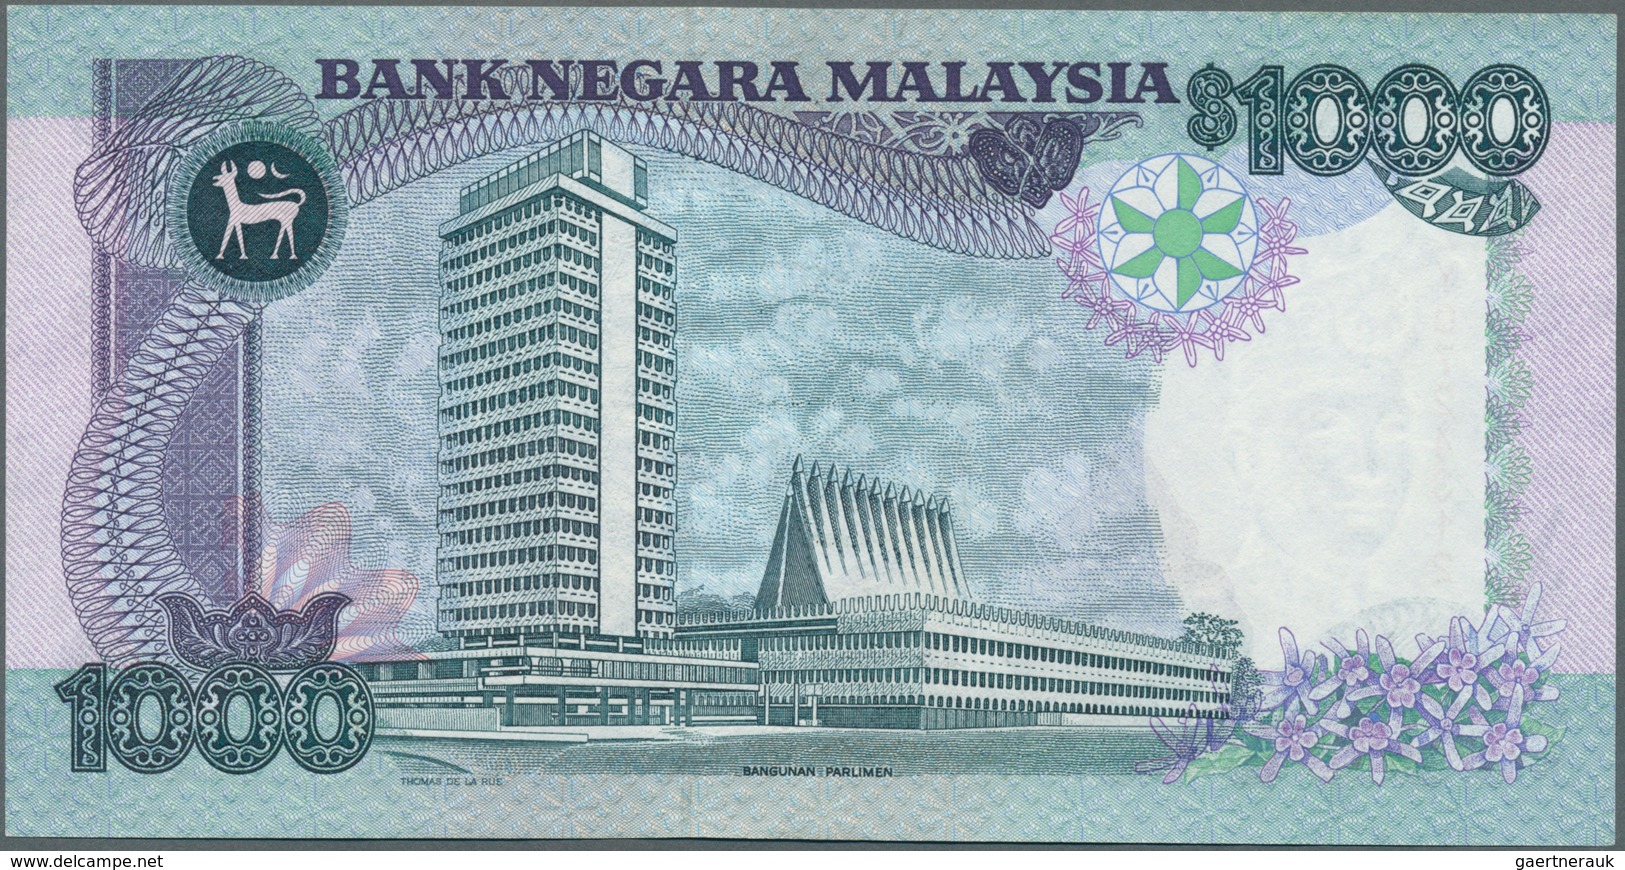 01994 Malaysia: 1000 Ringgit ND P. 34, In Condition: AUNC. - Malesia